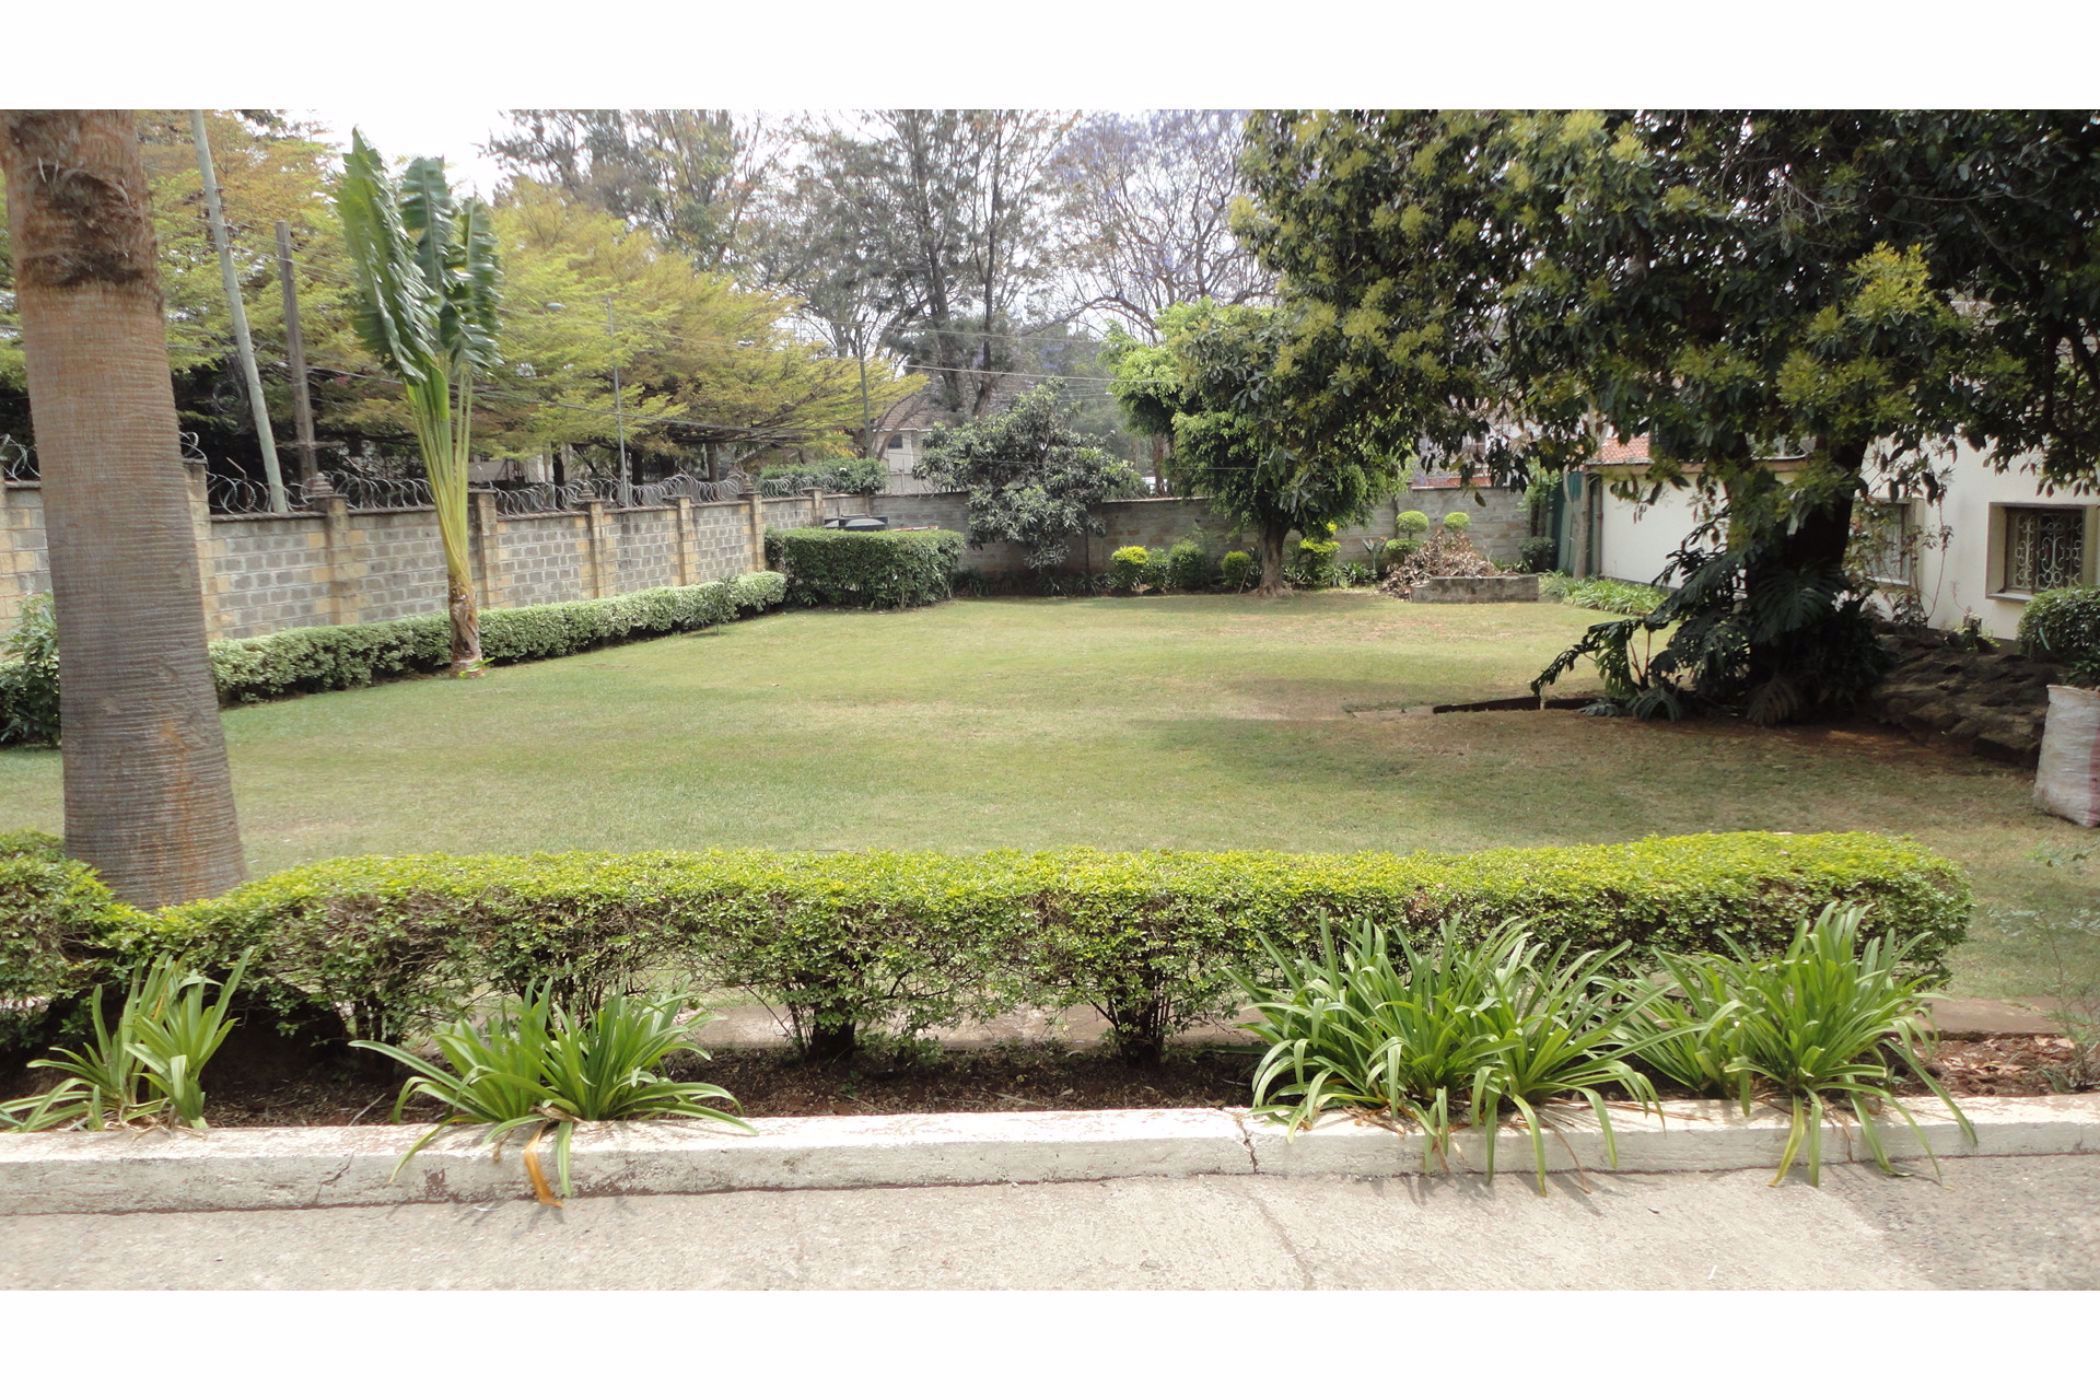 0.84 acres residential vacant land for sale in Lavington (Kenya)